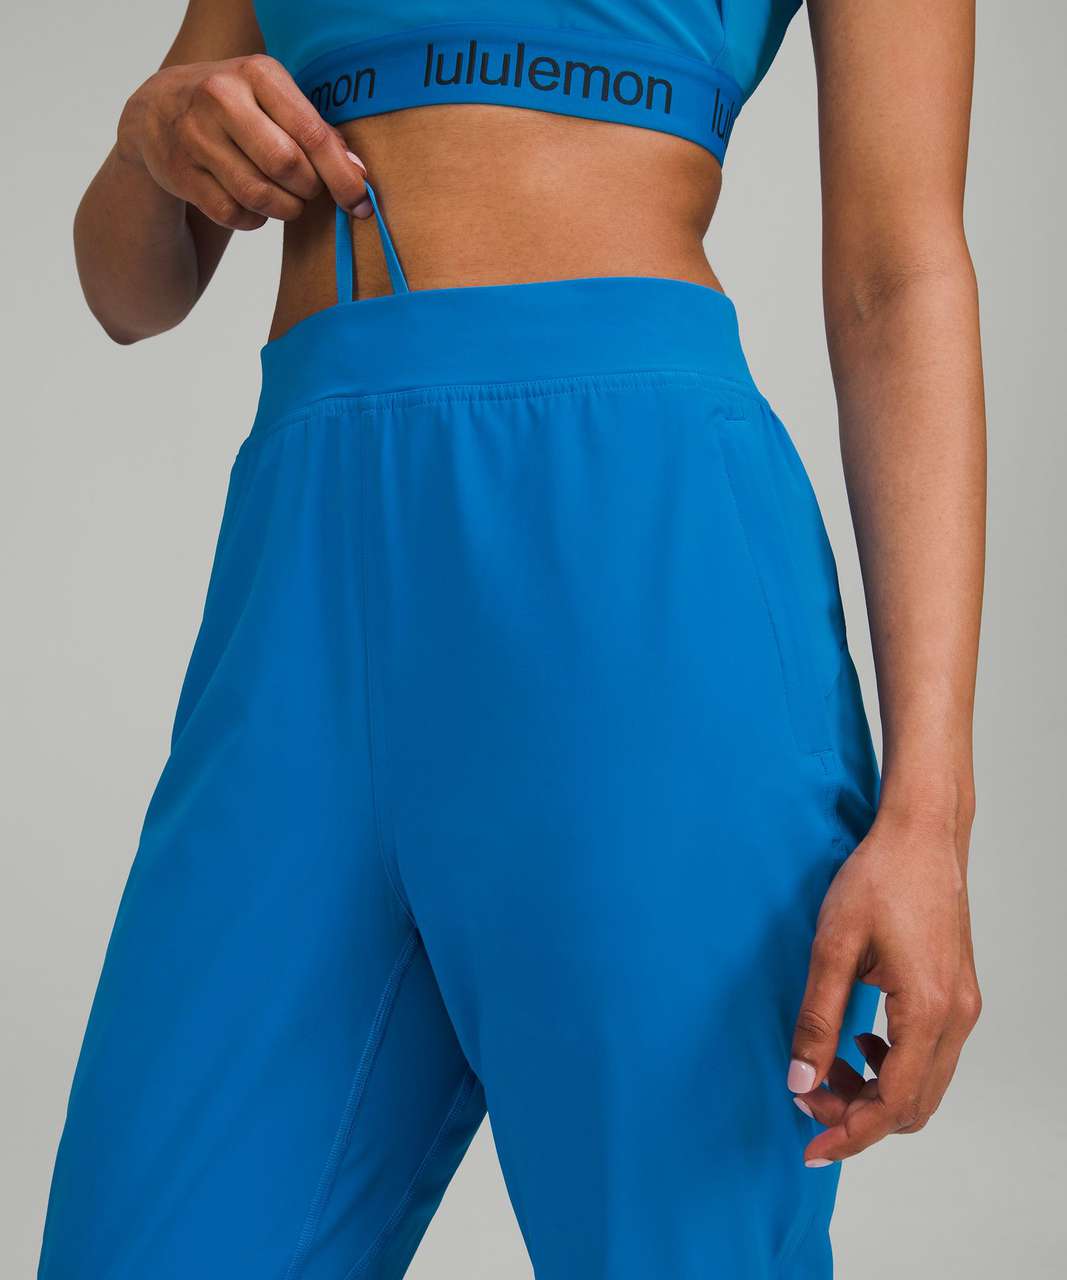 Lululemon Adapted State High-Rise Cropped Jogger 23" - Poolside